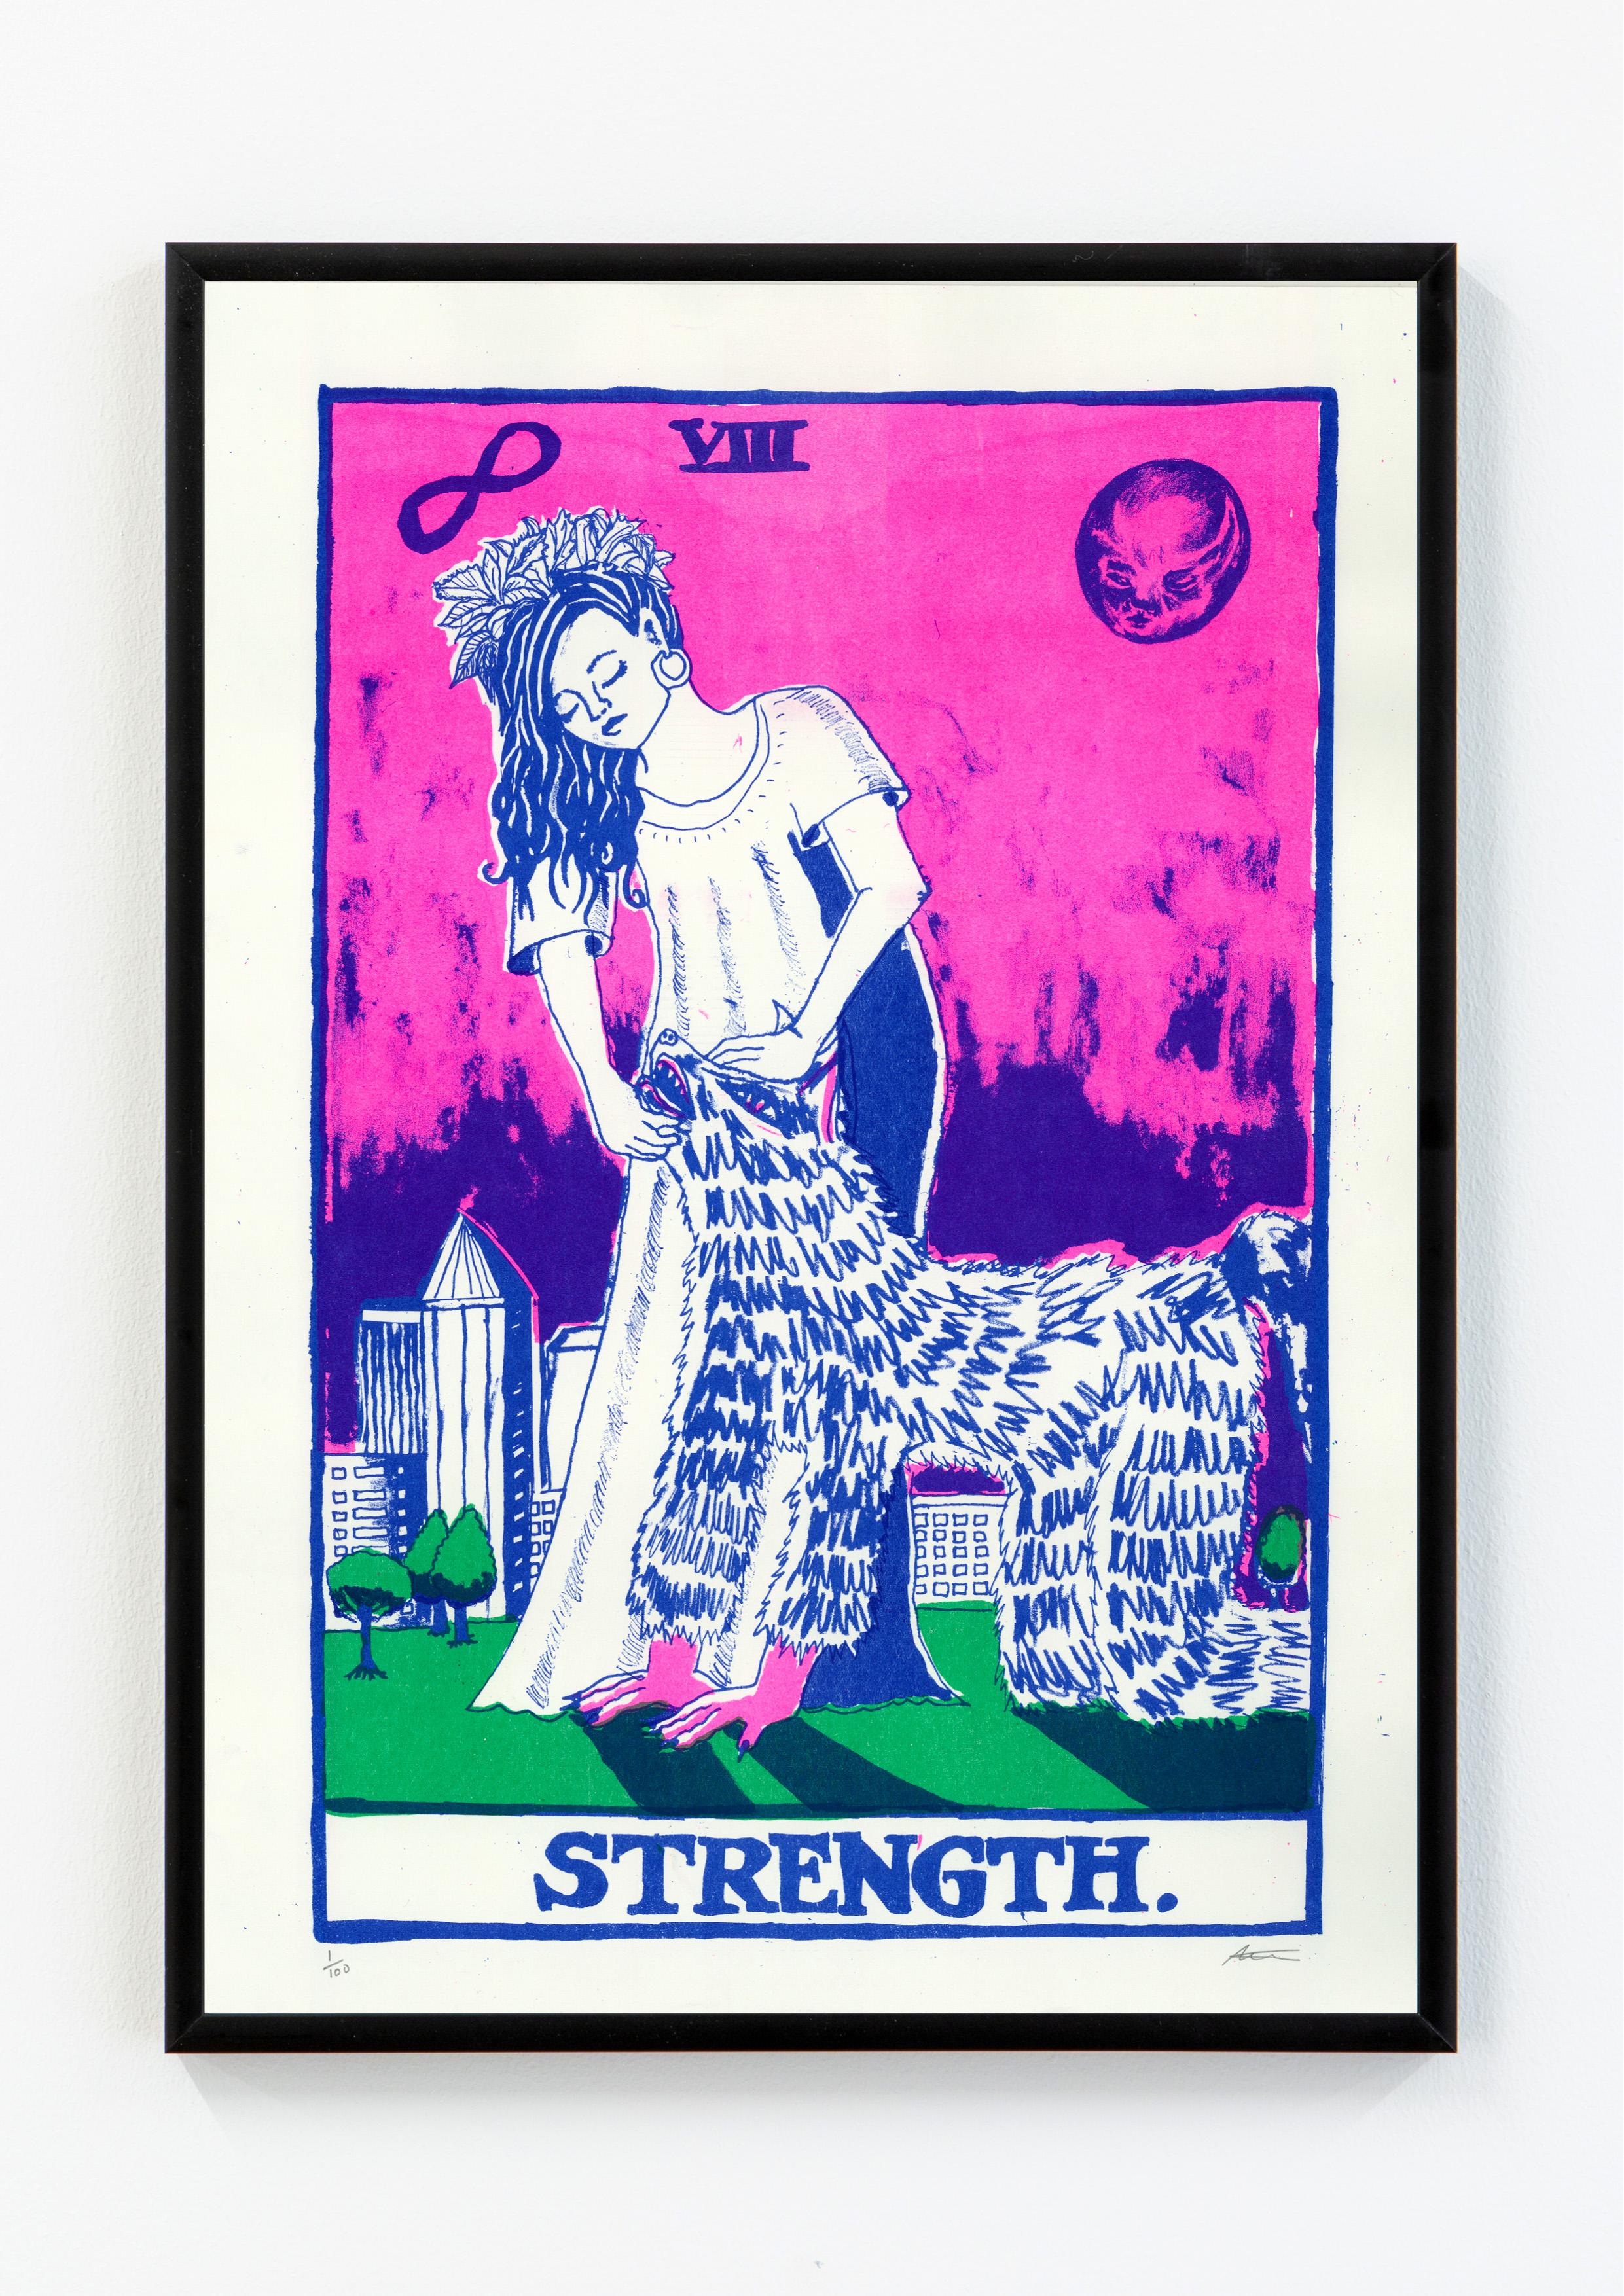 Alexi Marshall

Strength, 2021

Risograph print on Olin natural white 170gsm paper

42 x 29.7 cm (A3)

Edition of 100

Signed and numbered by the artist

Sold unframed

This piece is a reimagining of the Major Arcana tarot card from the rider-Waite